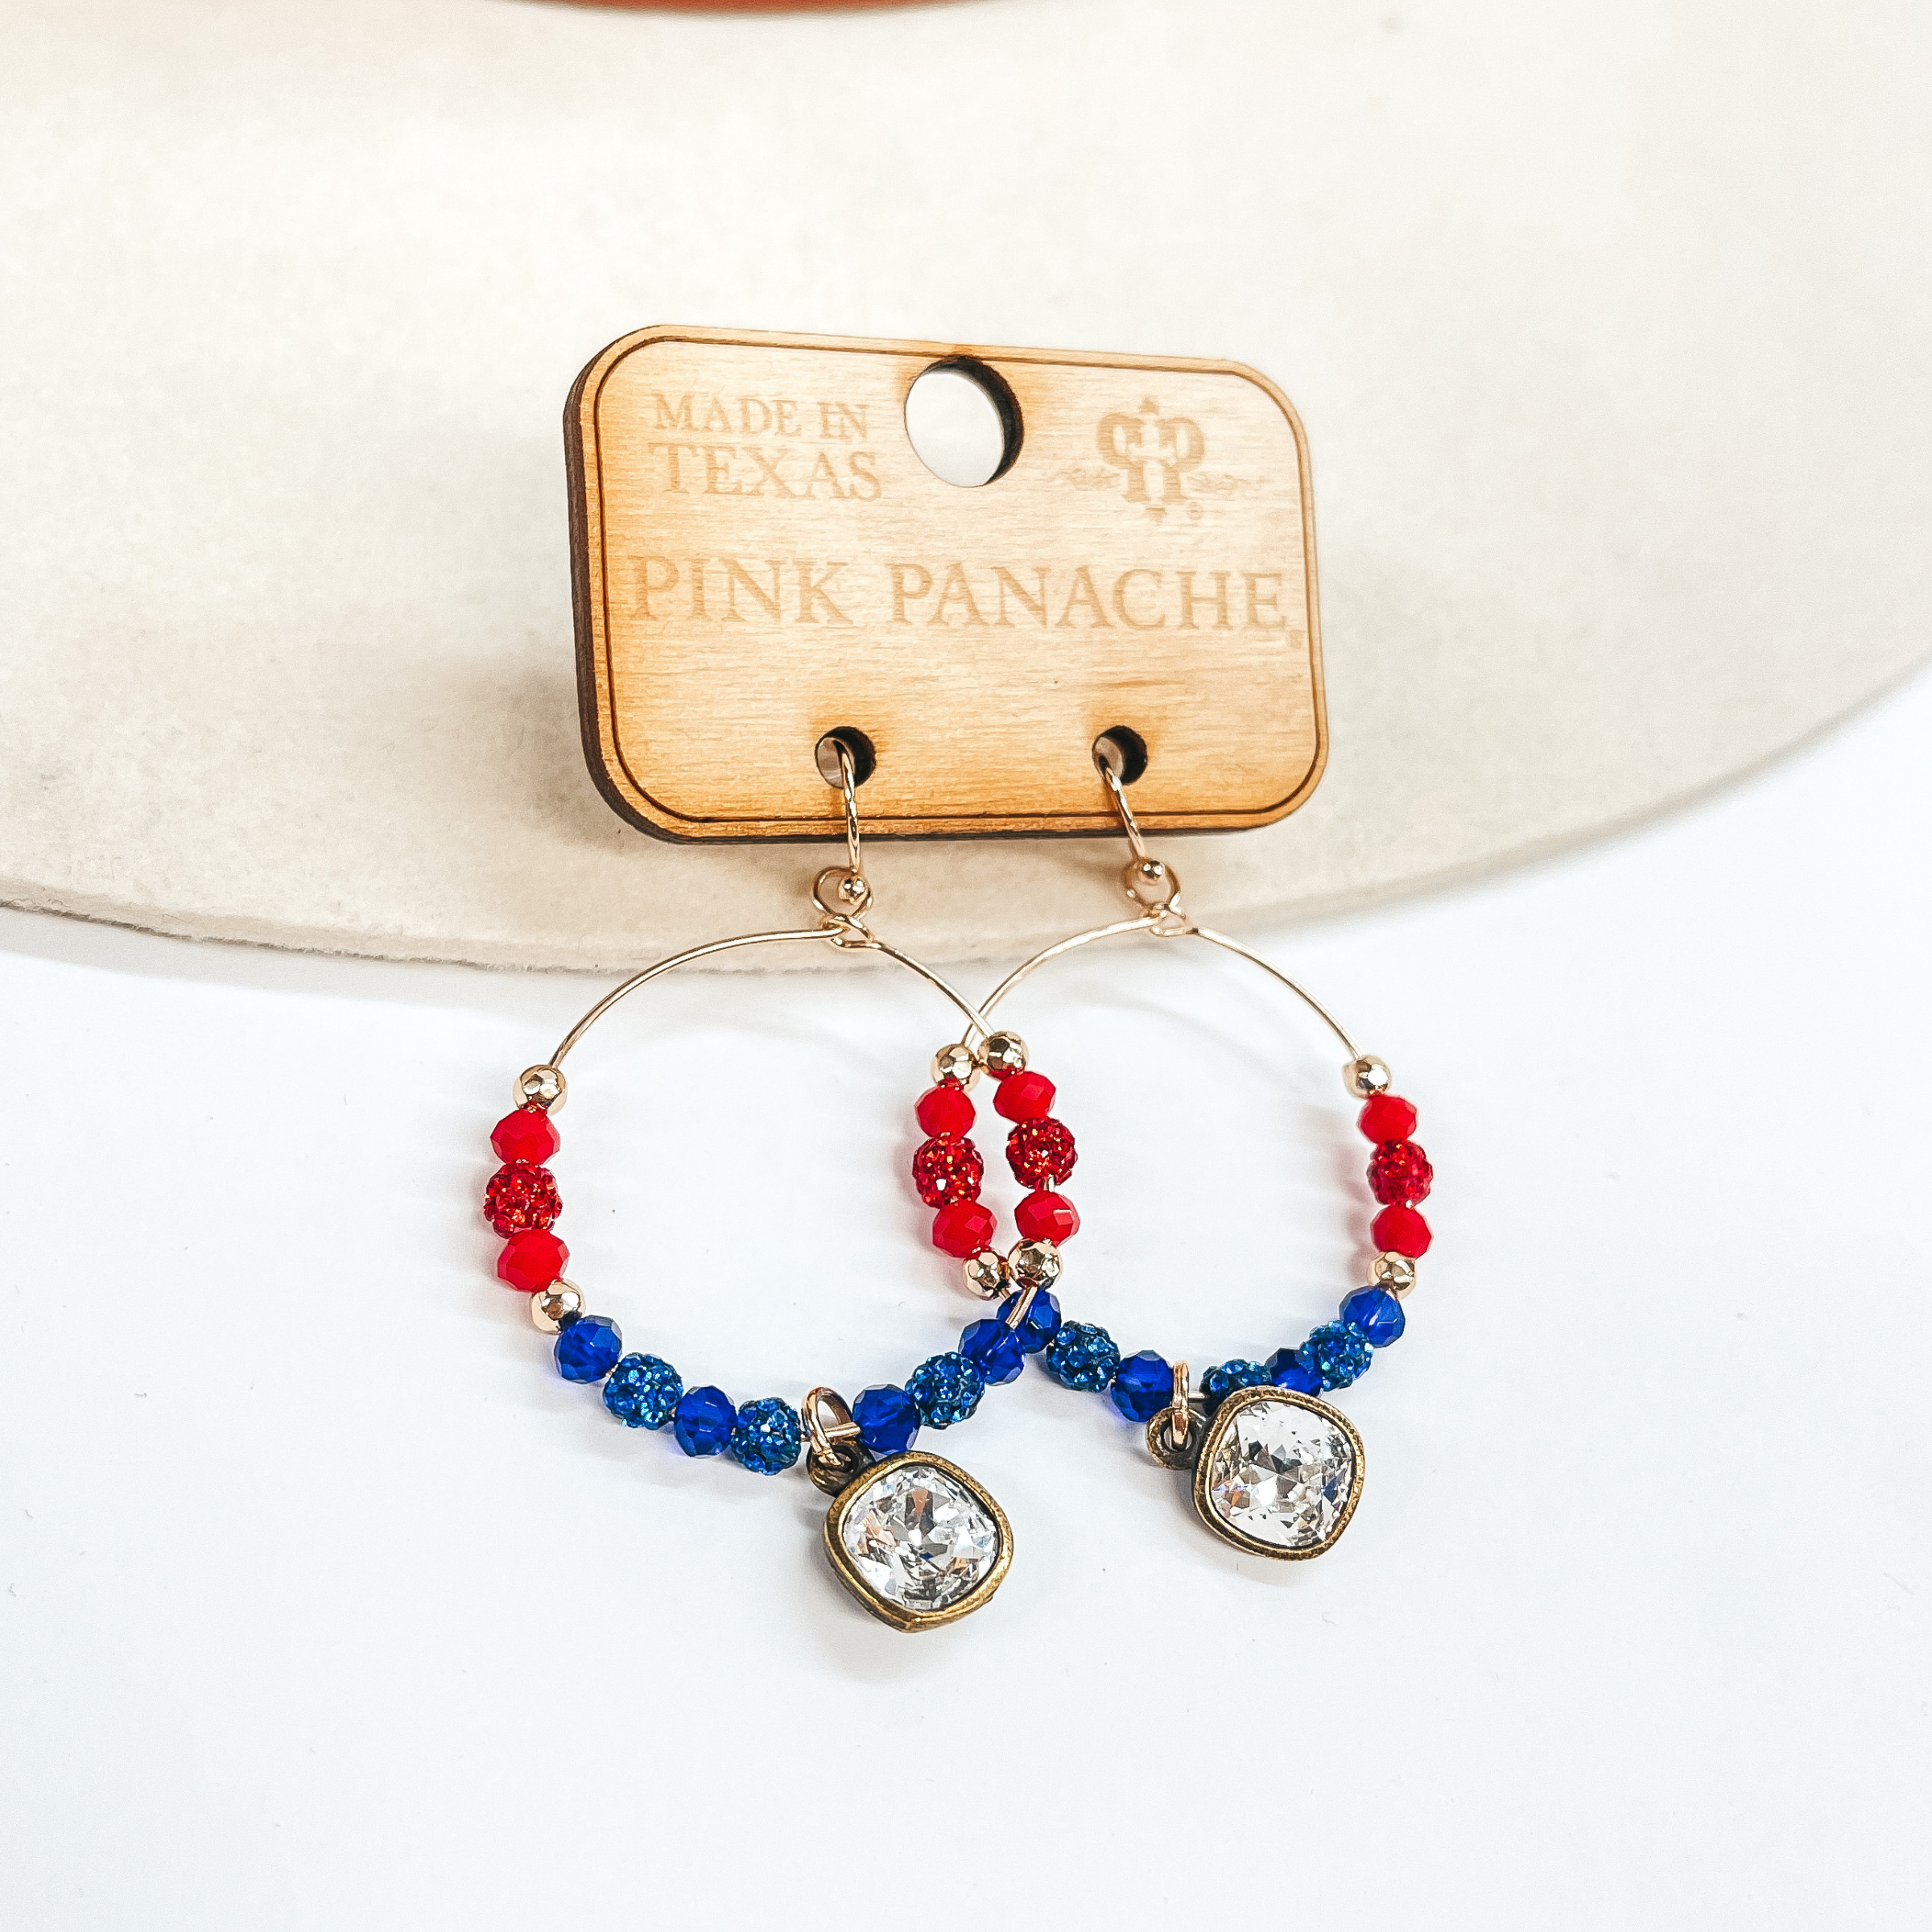 Pink Panache | Gold Hoop Earrings with Red, White, and Blue Crystalized Beads with Hanging Clear Crystal - Giddy Up Glamour Boutique